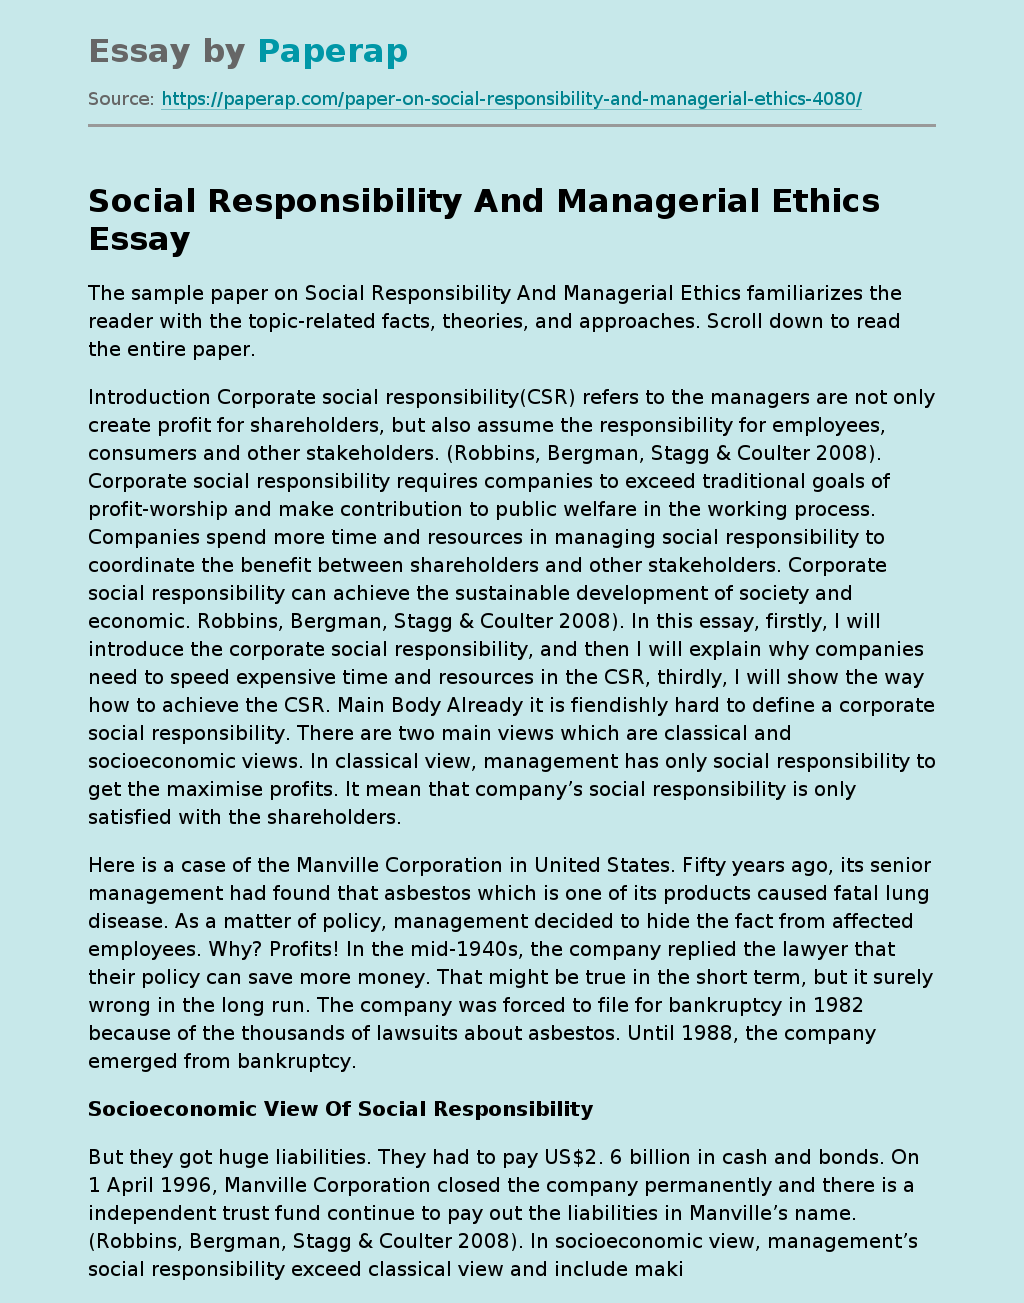 Social Responsibility And Managerial Ethics